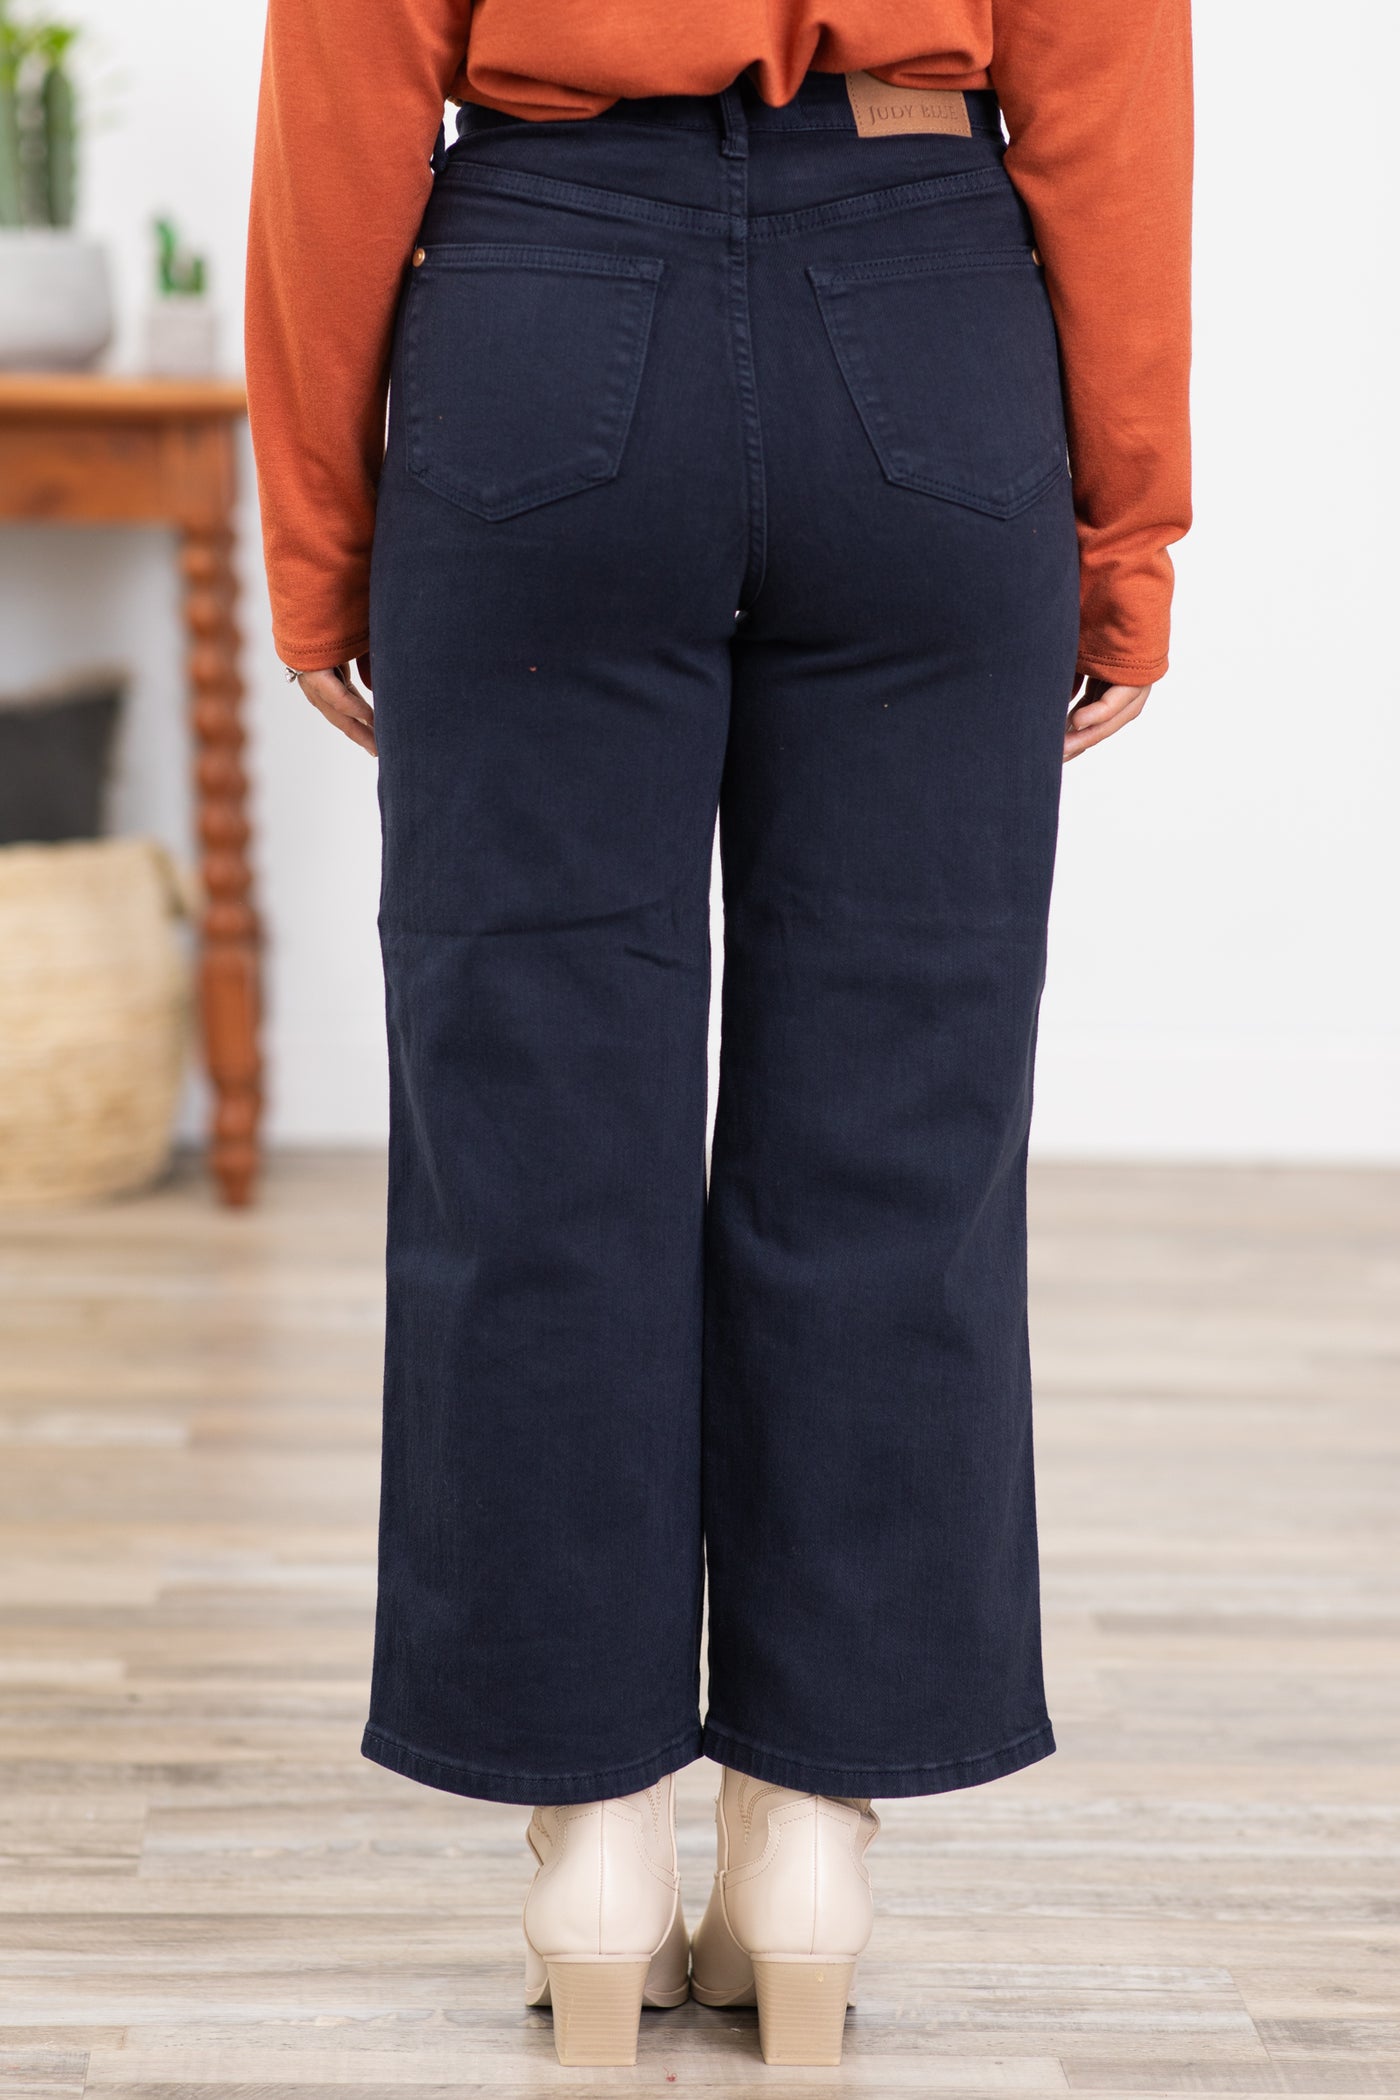 Judy Blue Jeans - Flare, Curvy, High-Waisted & More – OAK + IVY